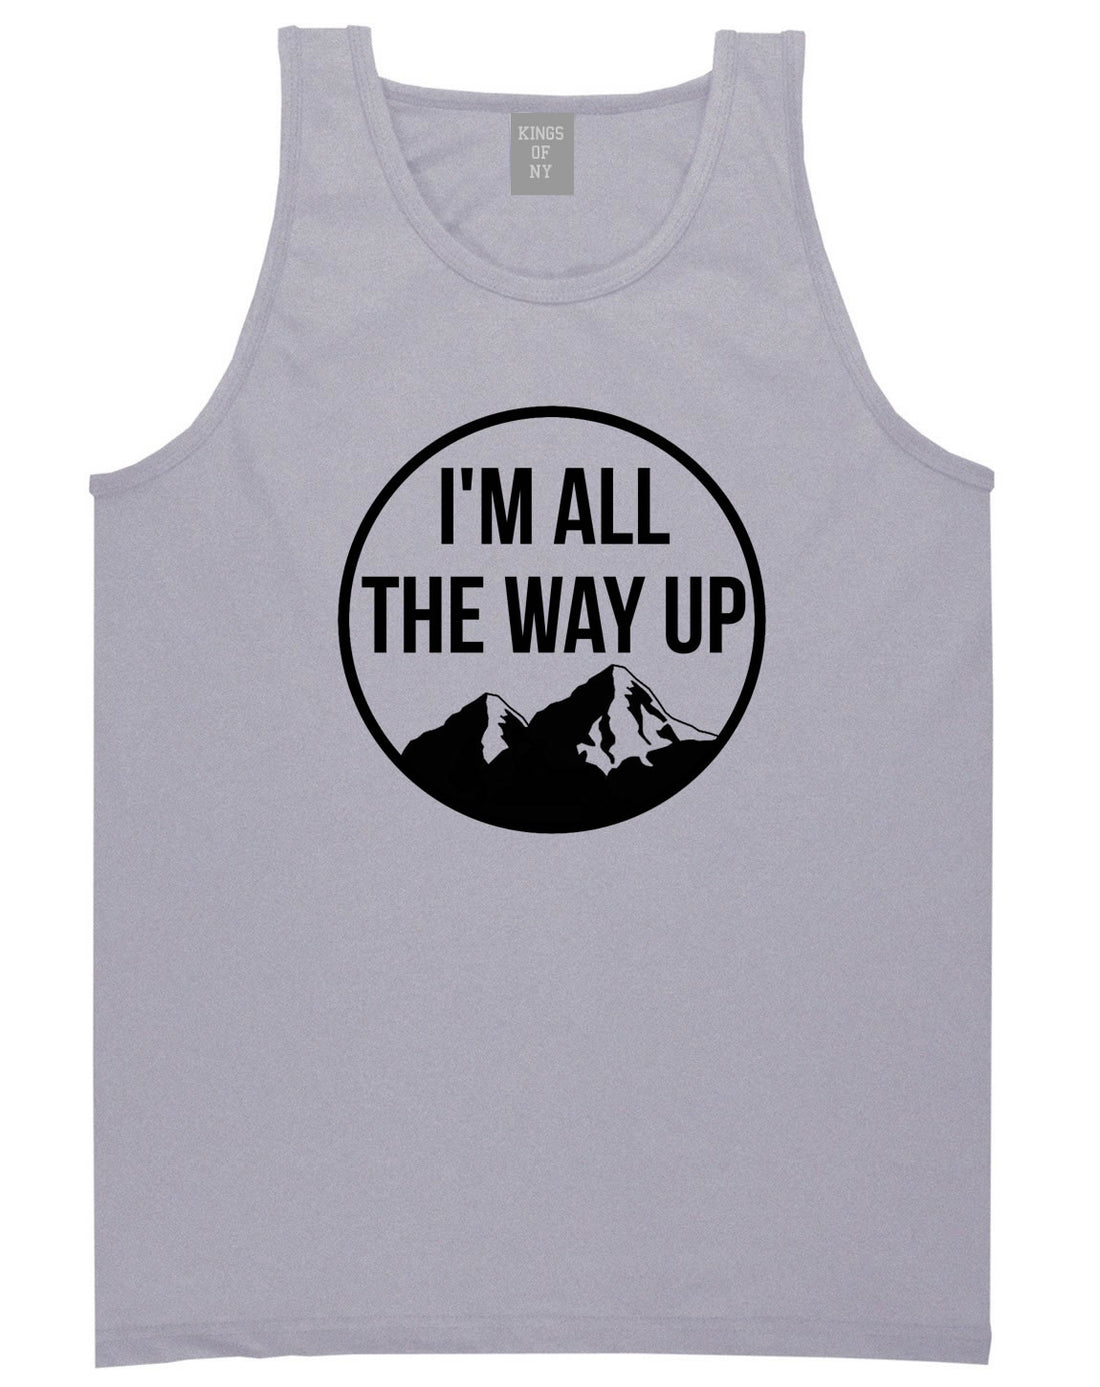 I'm All The Way Up Tank Top By Kings Of NY